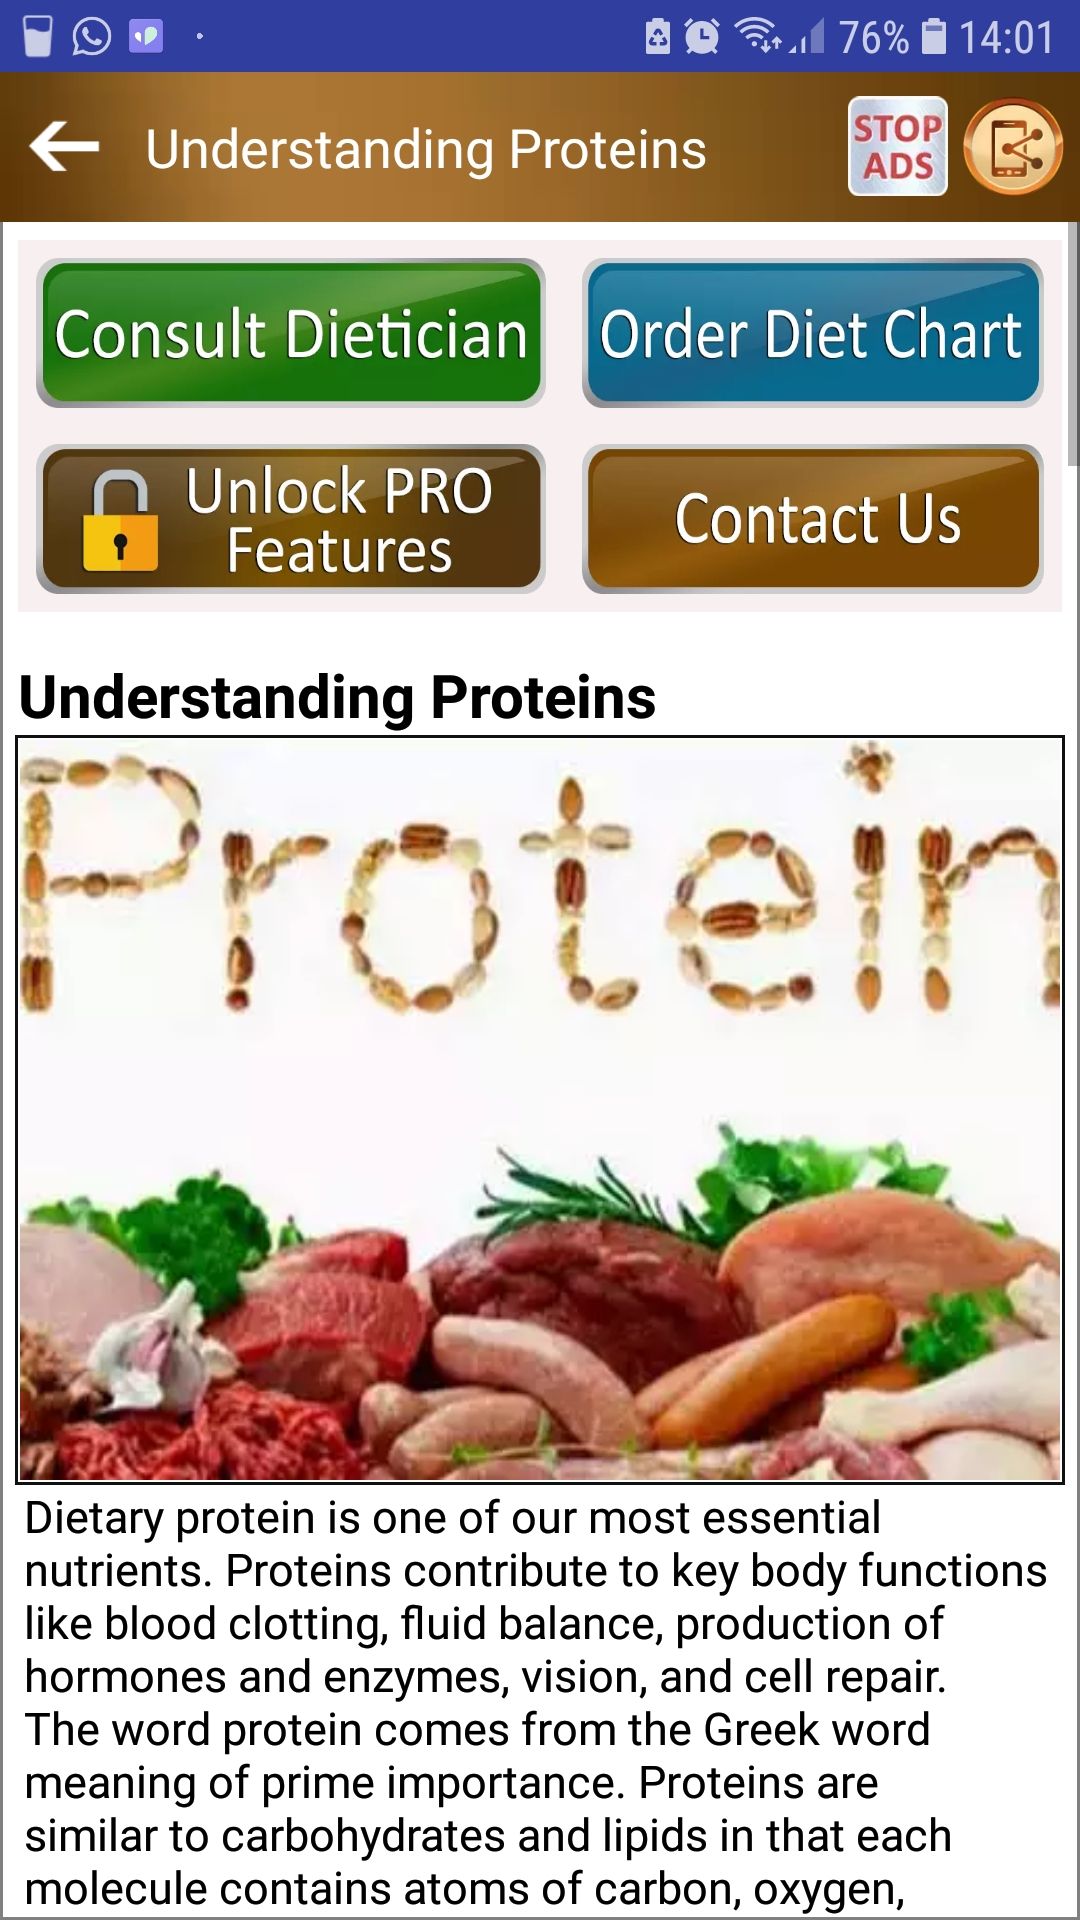 Protein Rich Food Sources Guide mobile app understanding protein